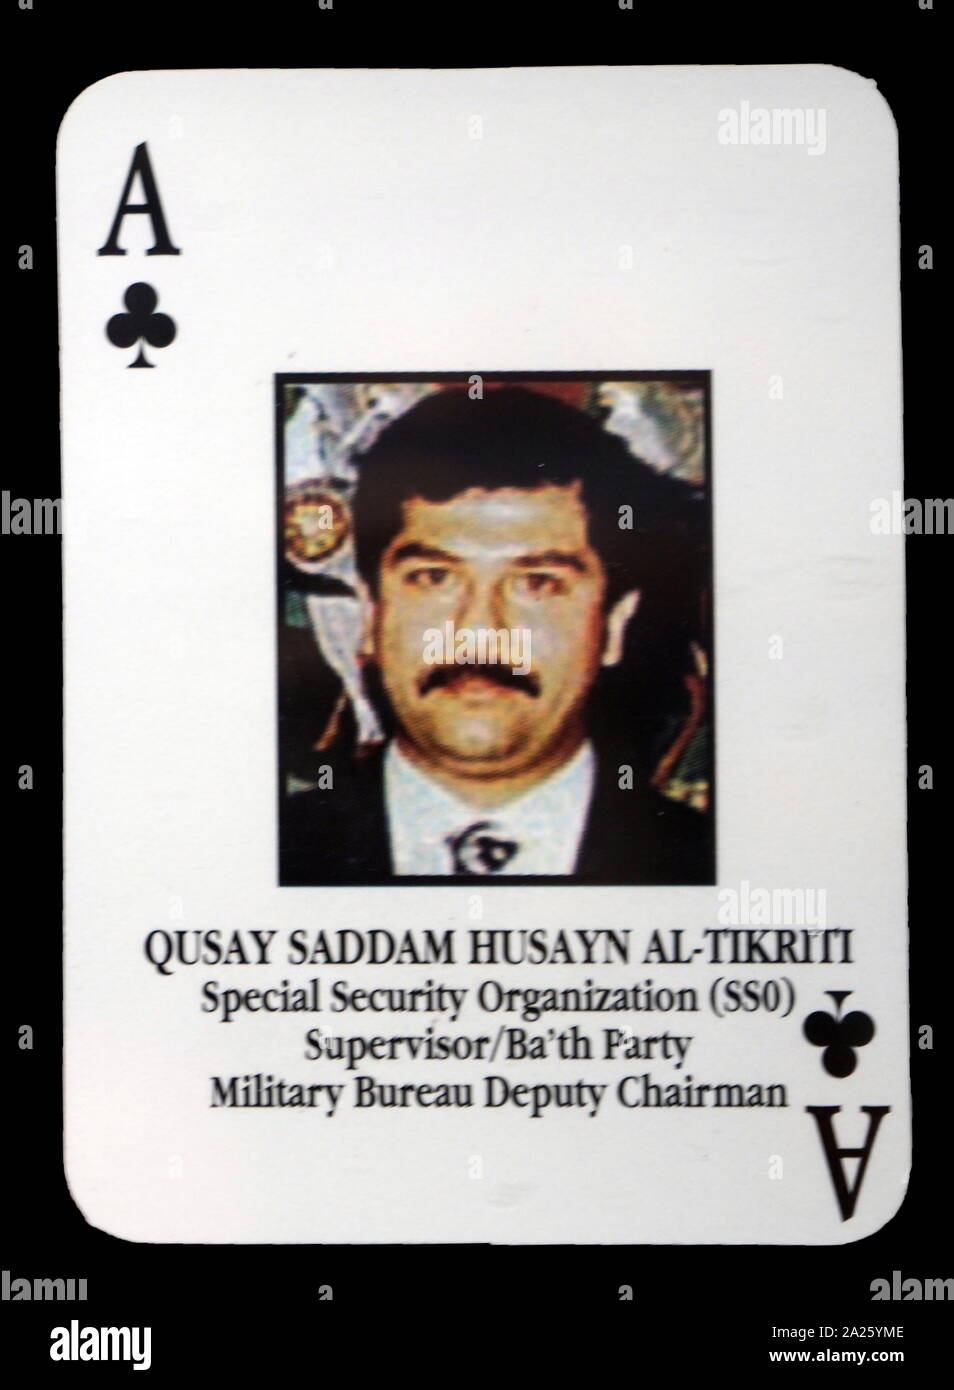 Most-wanted Iraqi playing cards - Qusay Saddam Husayn Al-Tikriti (Special Security Organization (SSO) Supervisor/ Ba'th Party Military Bureau Deputy Chairman). The U.S. military developed a set of playing cards to help troop identify the most-wanted members of President Saddam Hussein's government during the 2003 invasion of Iraq. Stock Photo